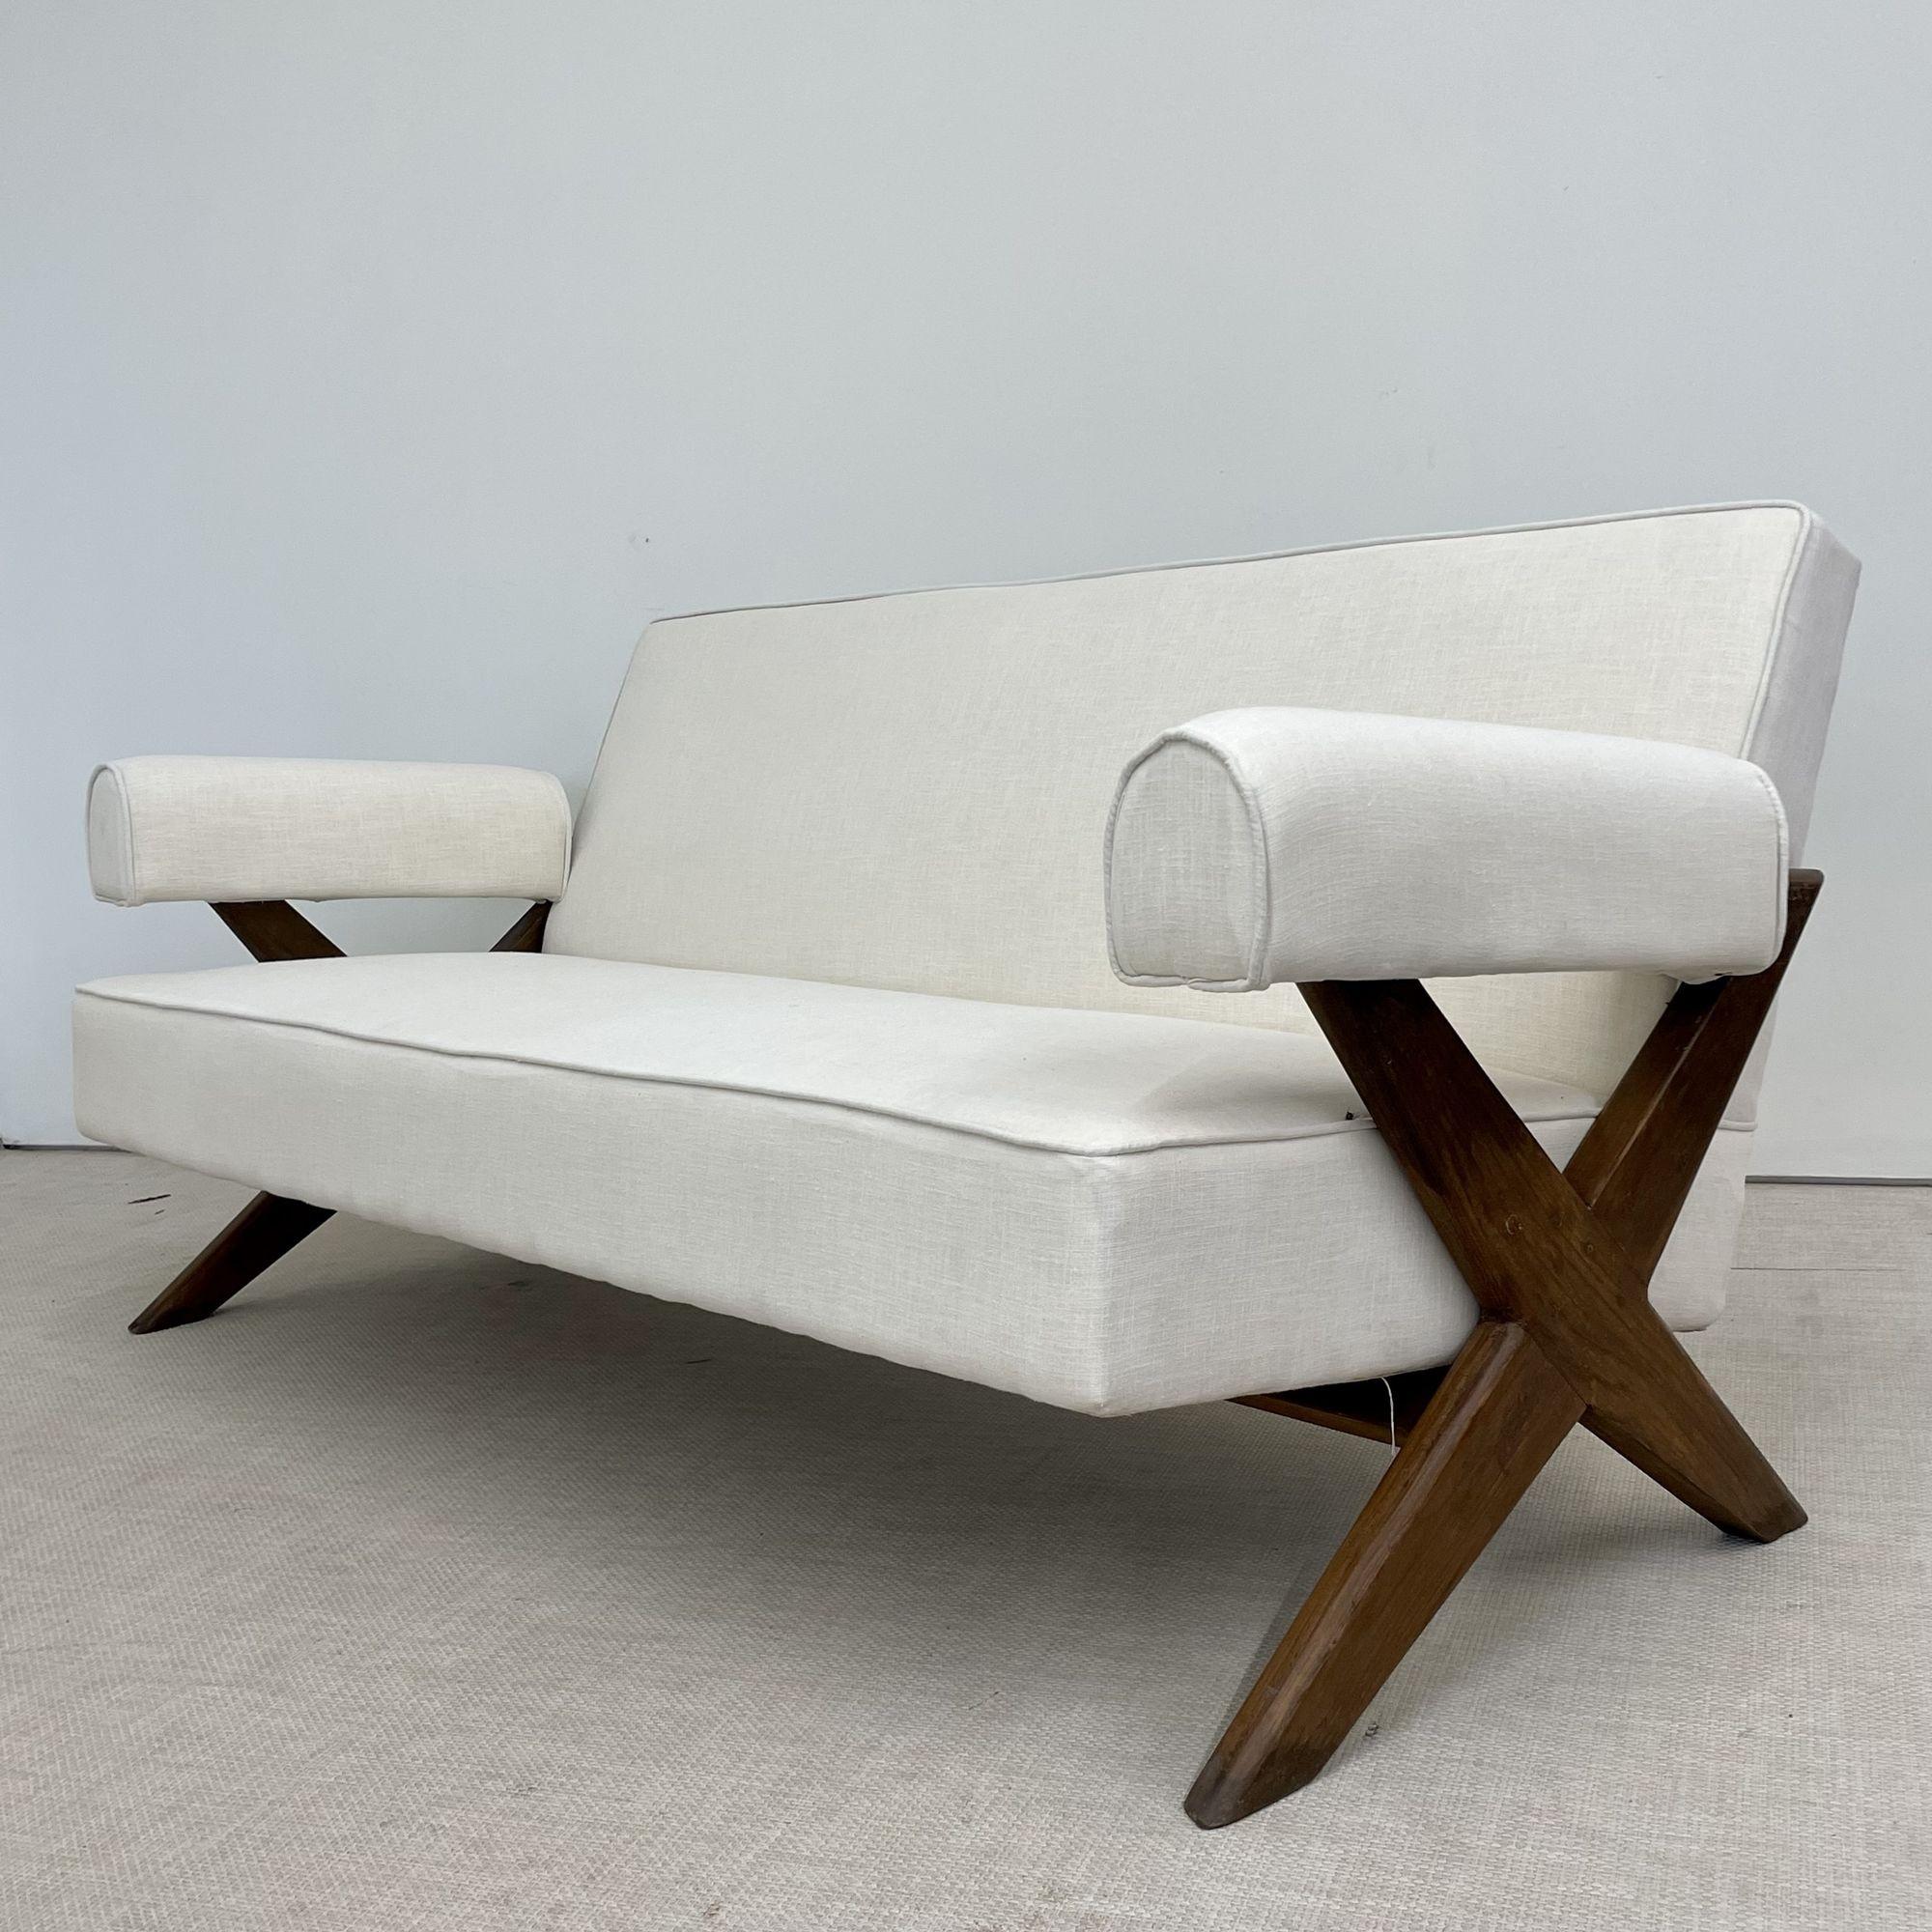 Pierre Jeanneret, French Mid-Century Modern, Sofa Set, X-Leg, Chandigarh, 1960s In Good Condition For Sale In Stamford, CT